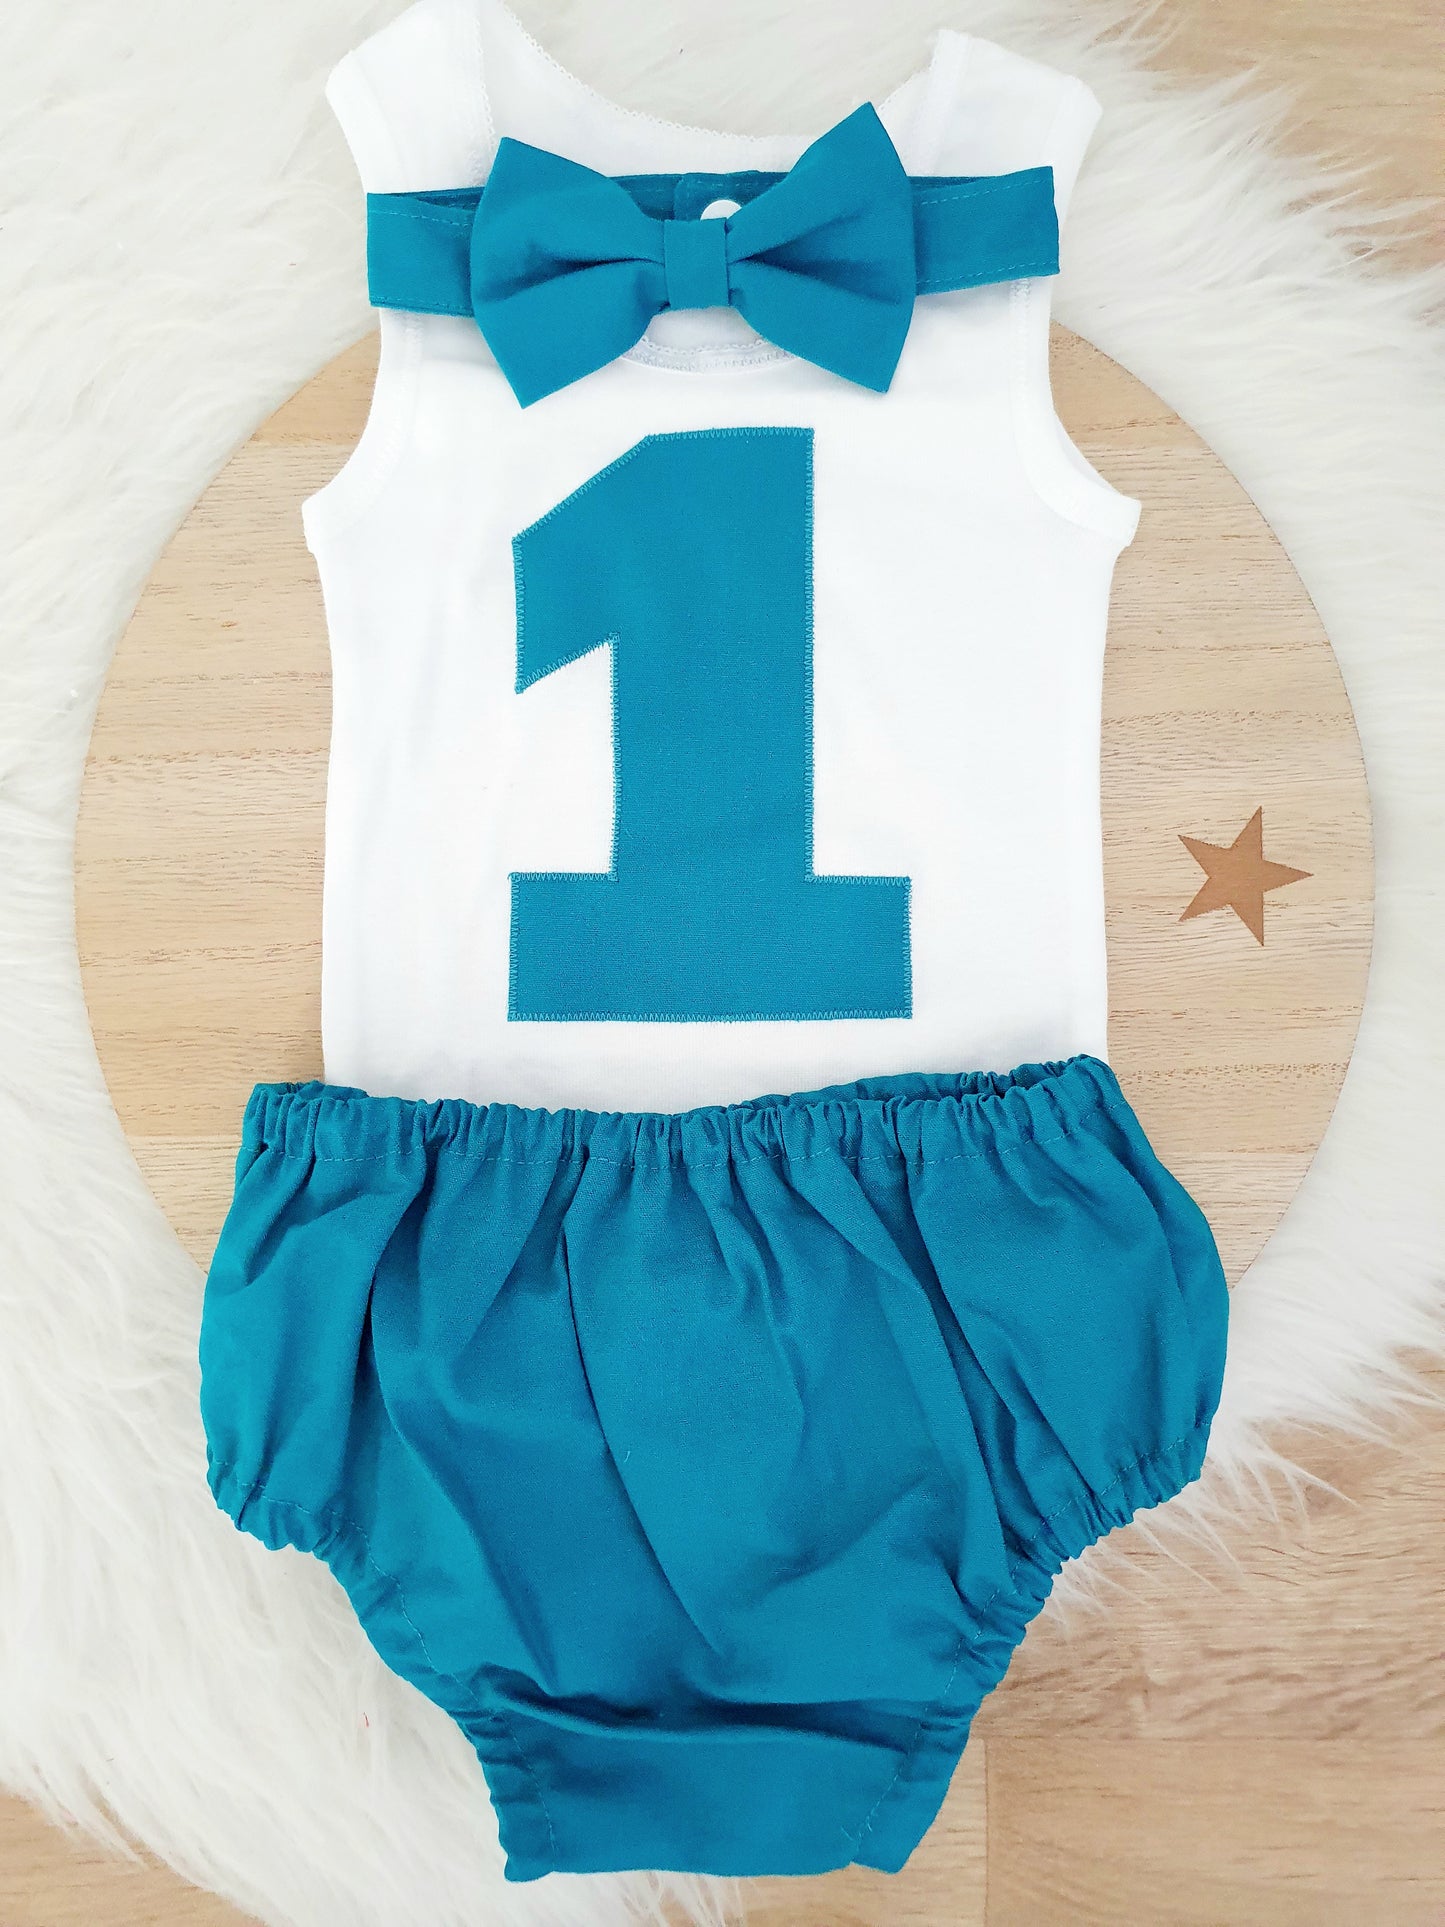 Teal Boys 1st Birthday - Cake Smash Outfit - Size 1, Nappy Cover, Tie & Singlet Set, TEAL